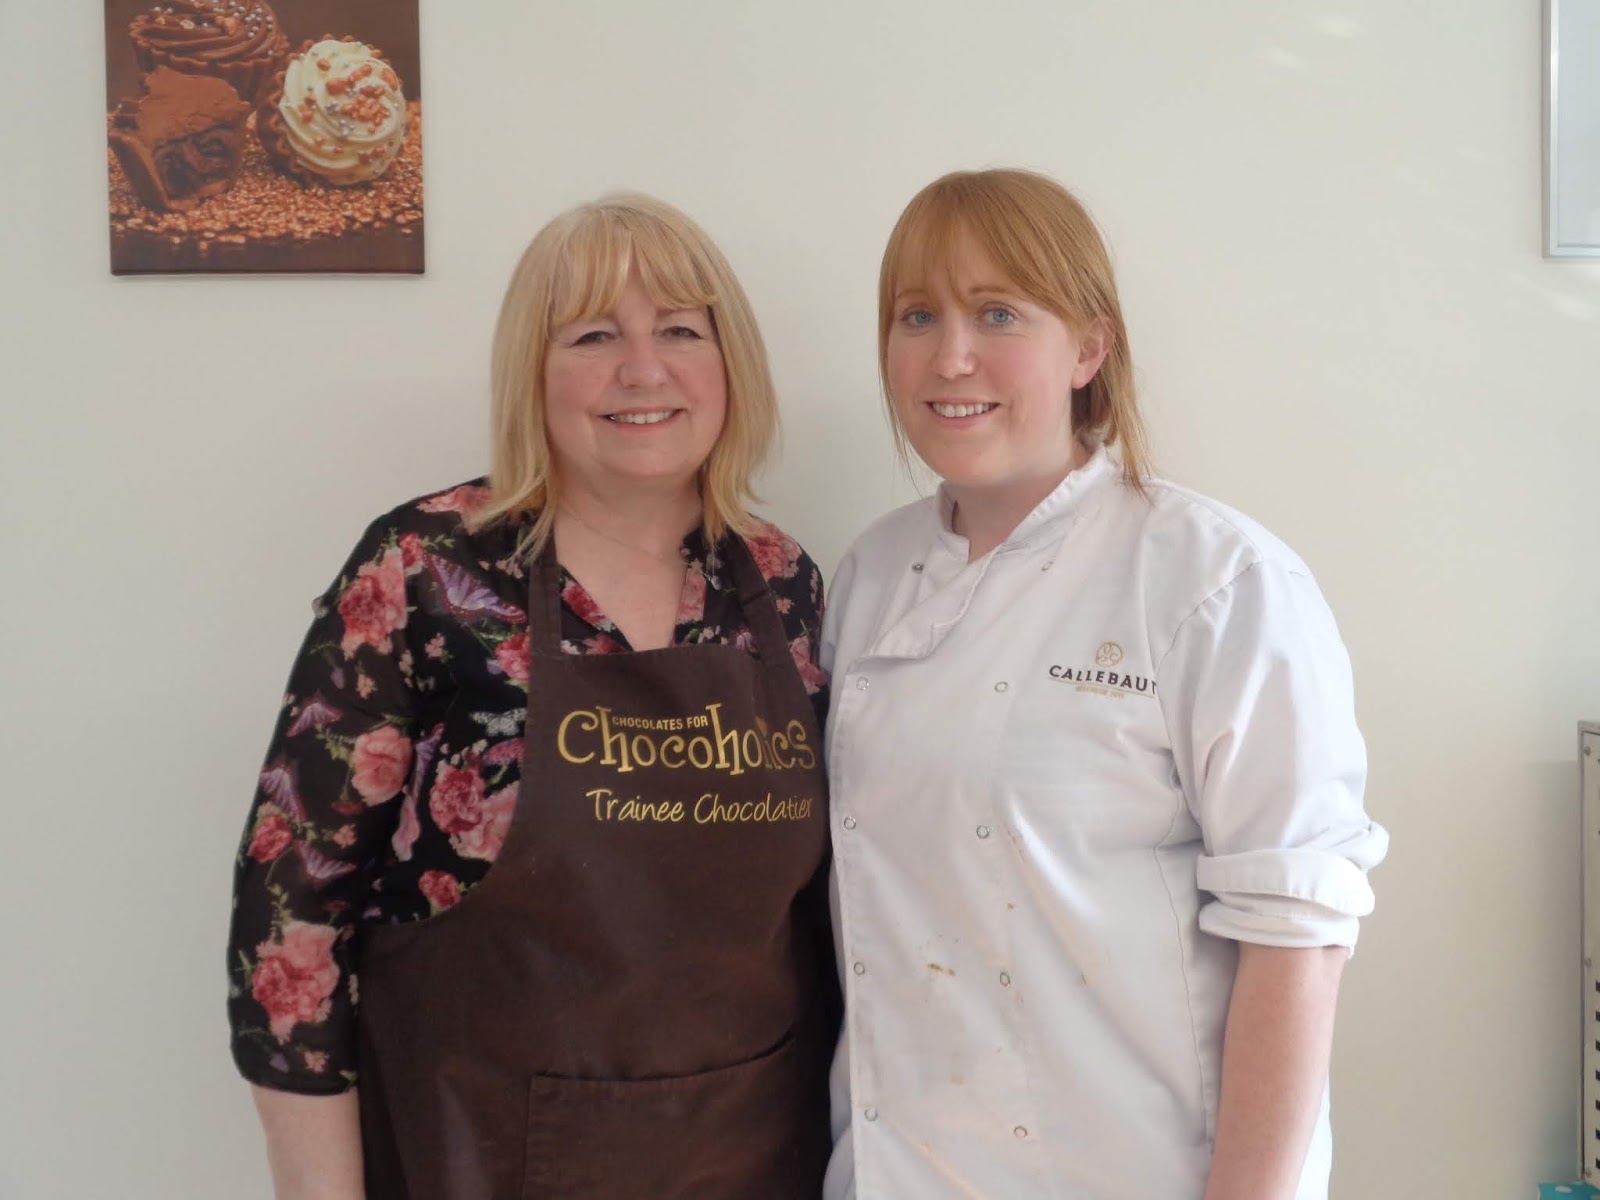 The Ultimate Chocolate Workshop at Chocolates for Chocoholics, Hurst